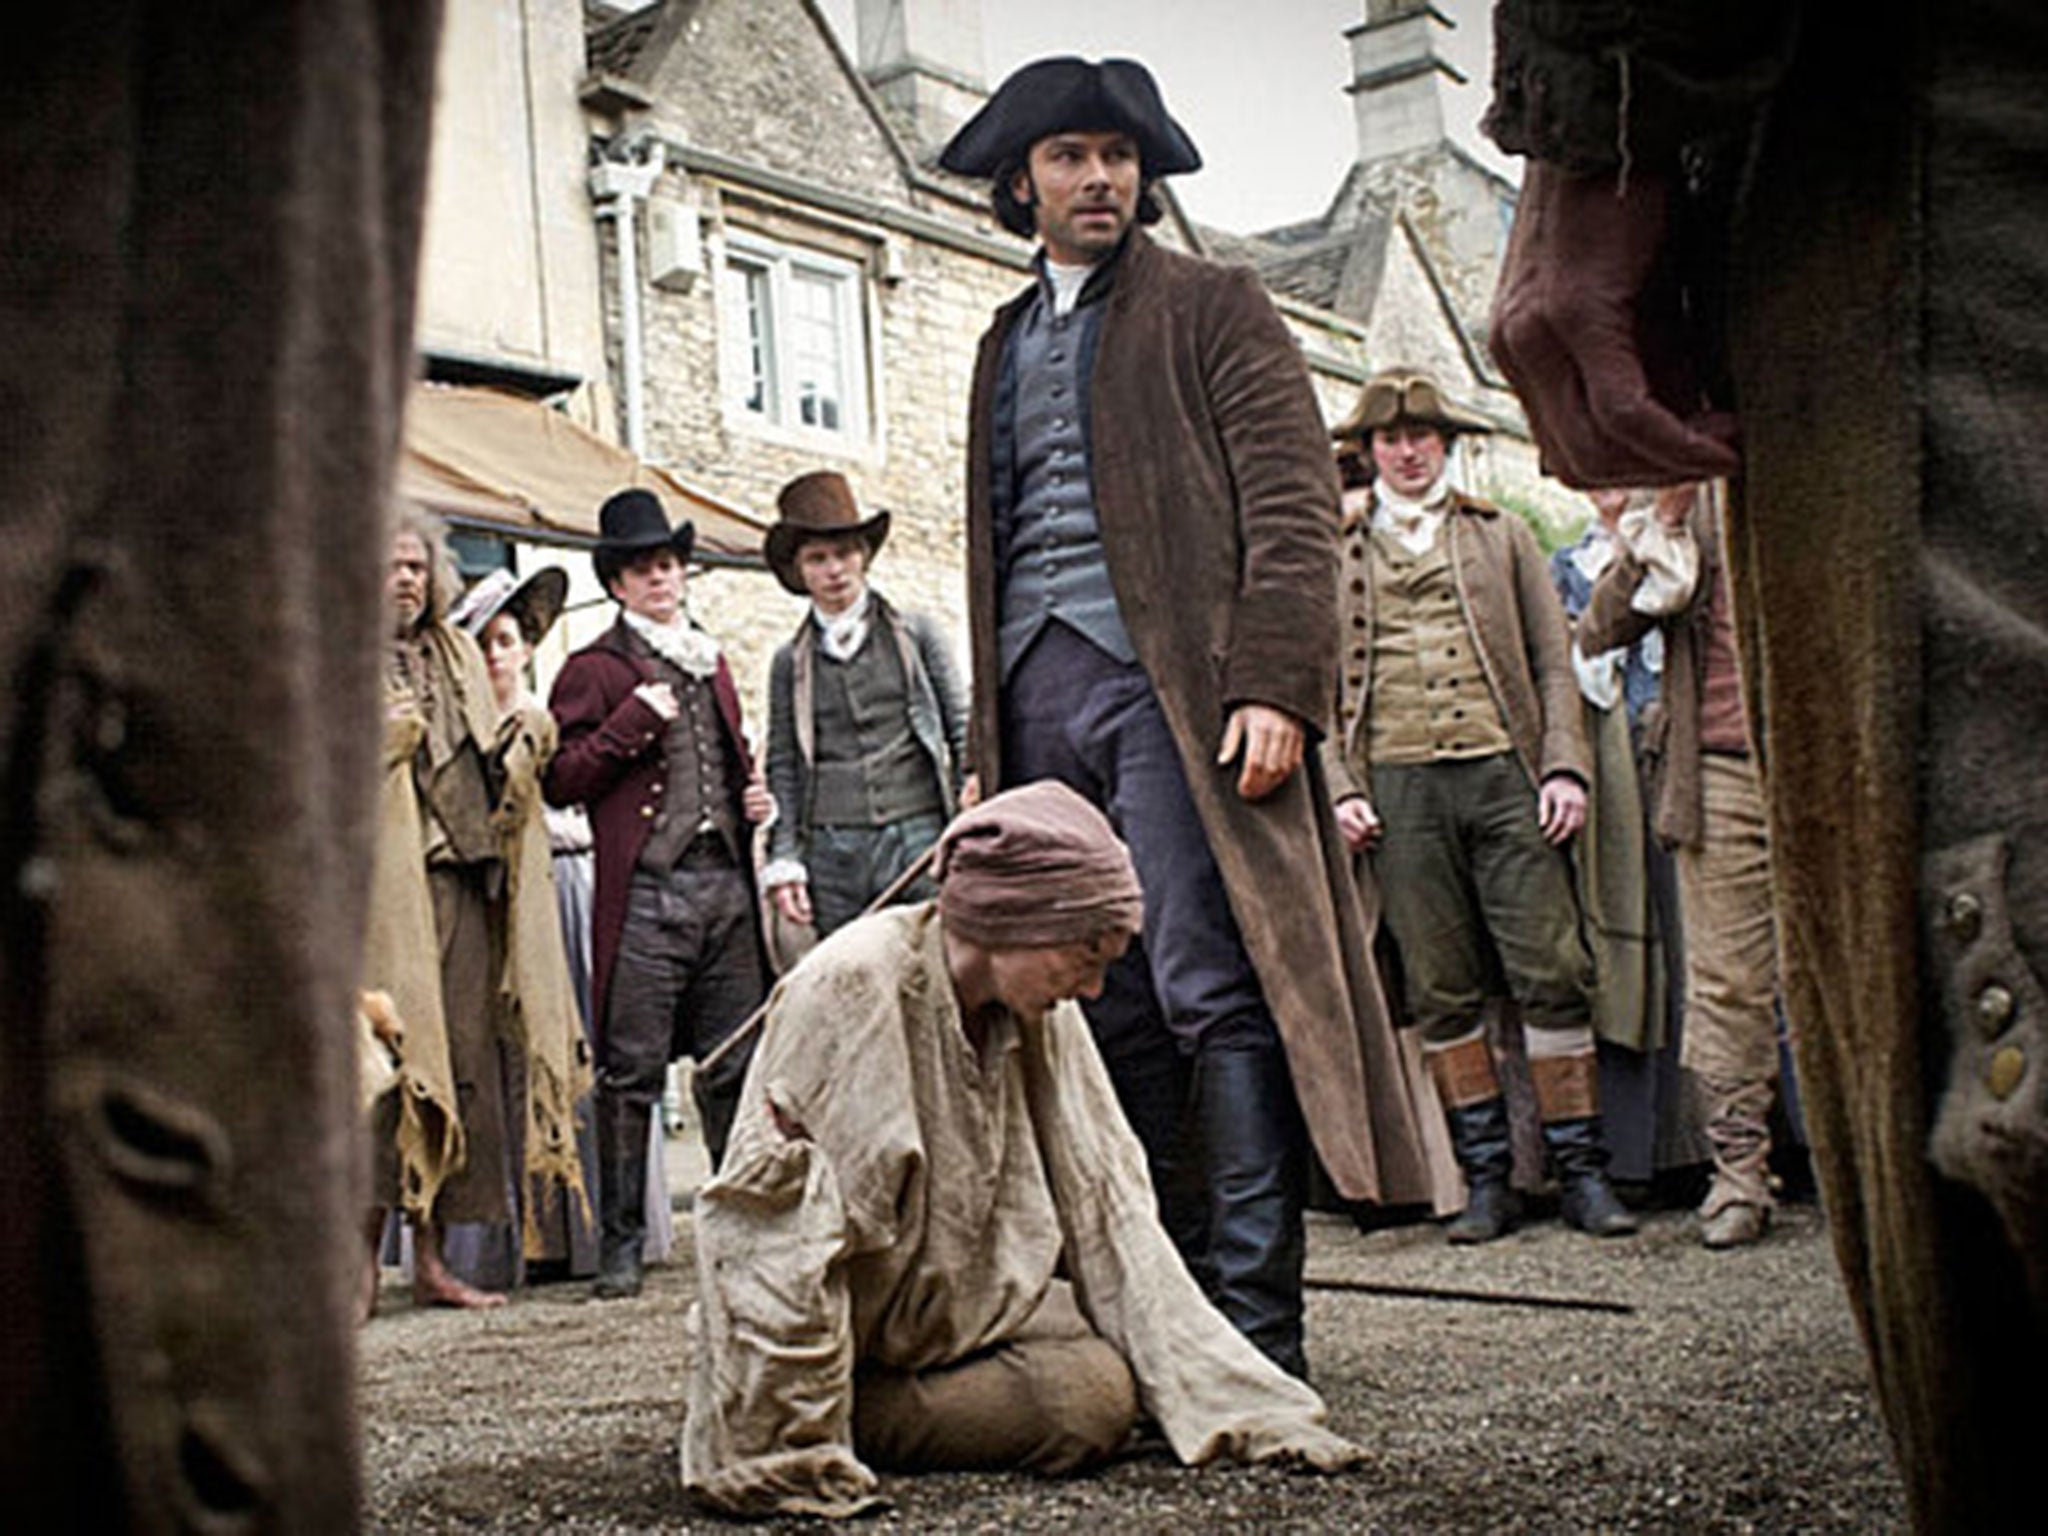 A burglar alarm can be seen in the background of this BBC Poldark press shot